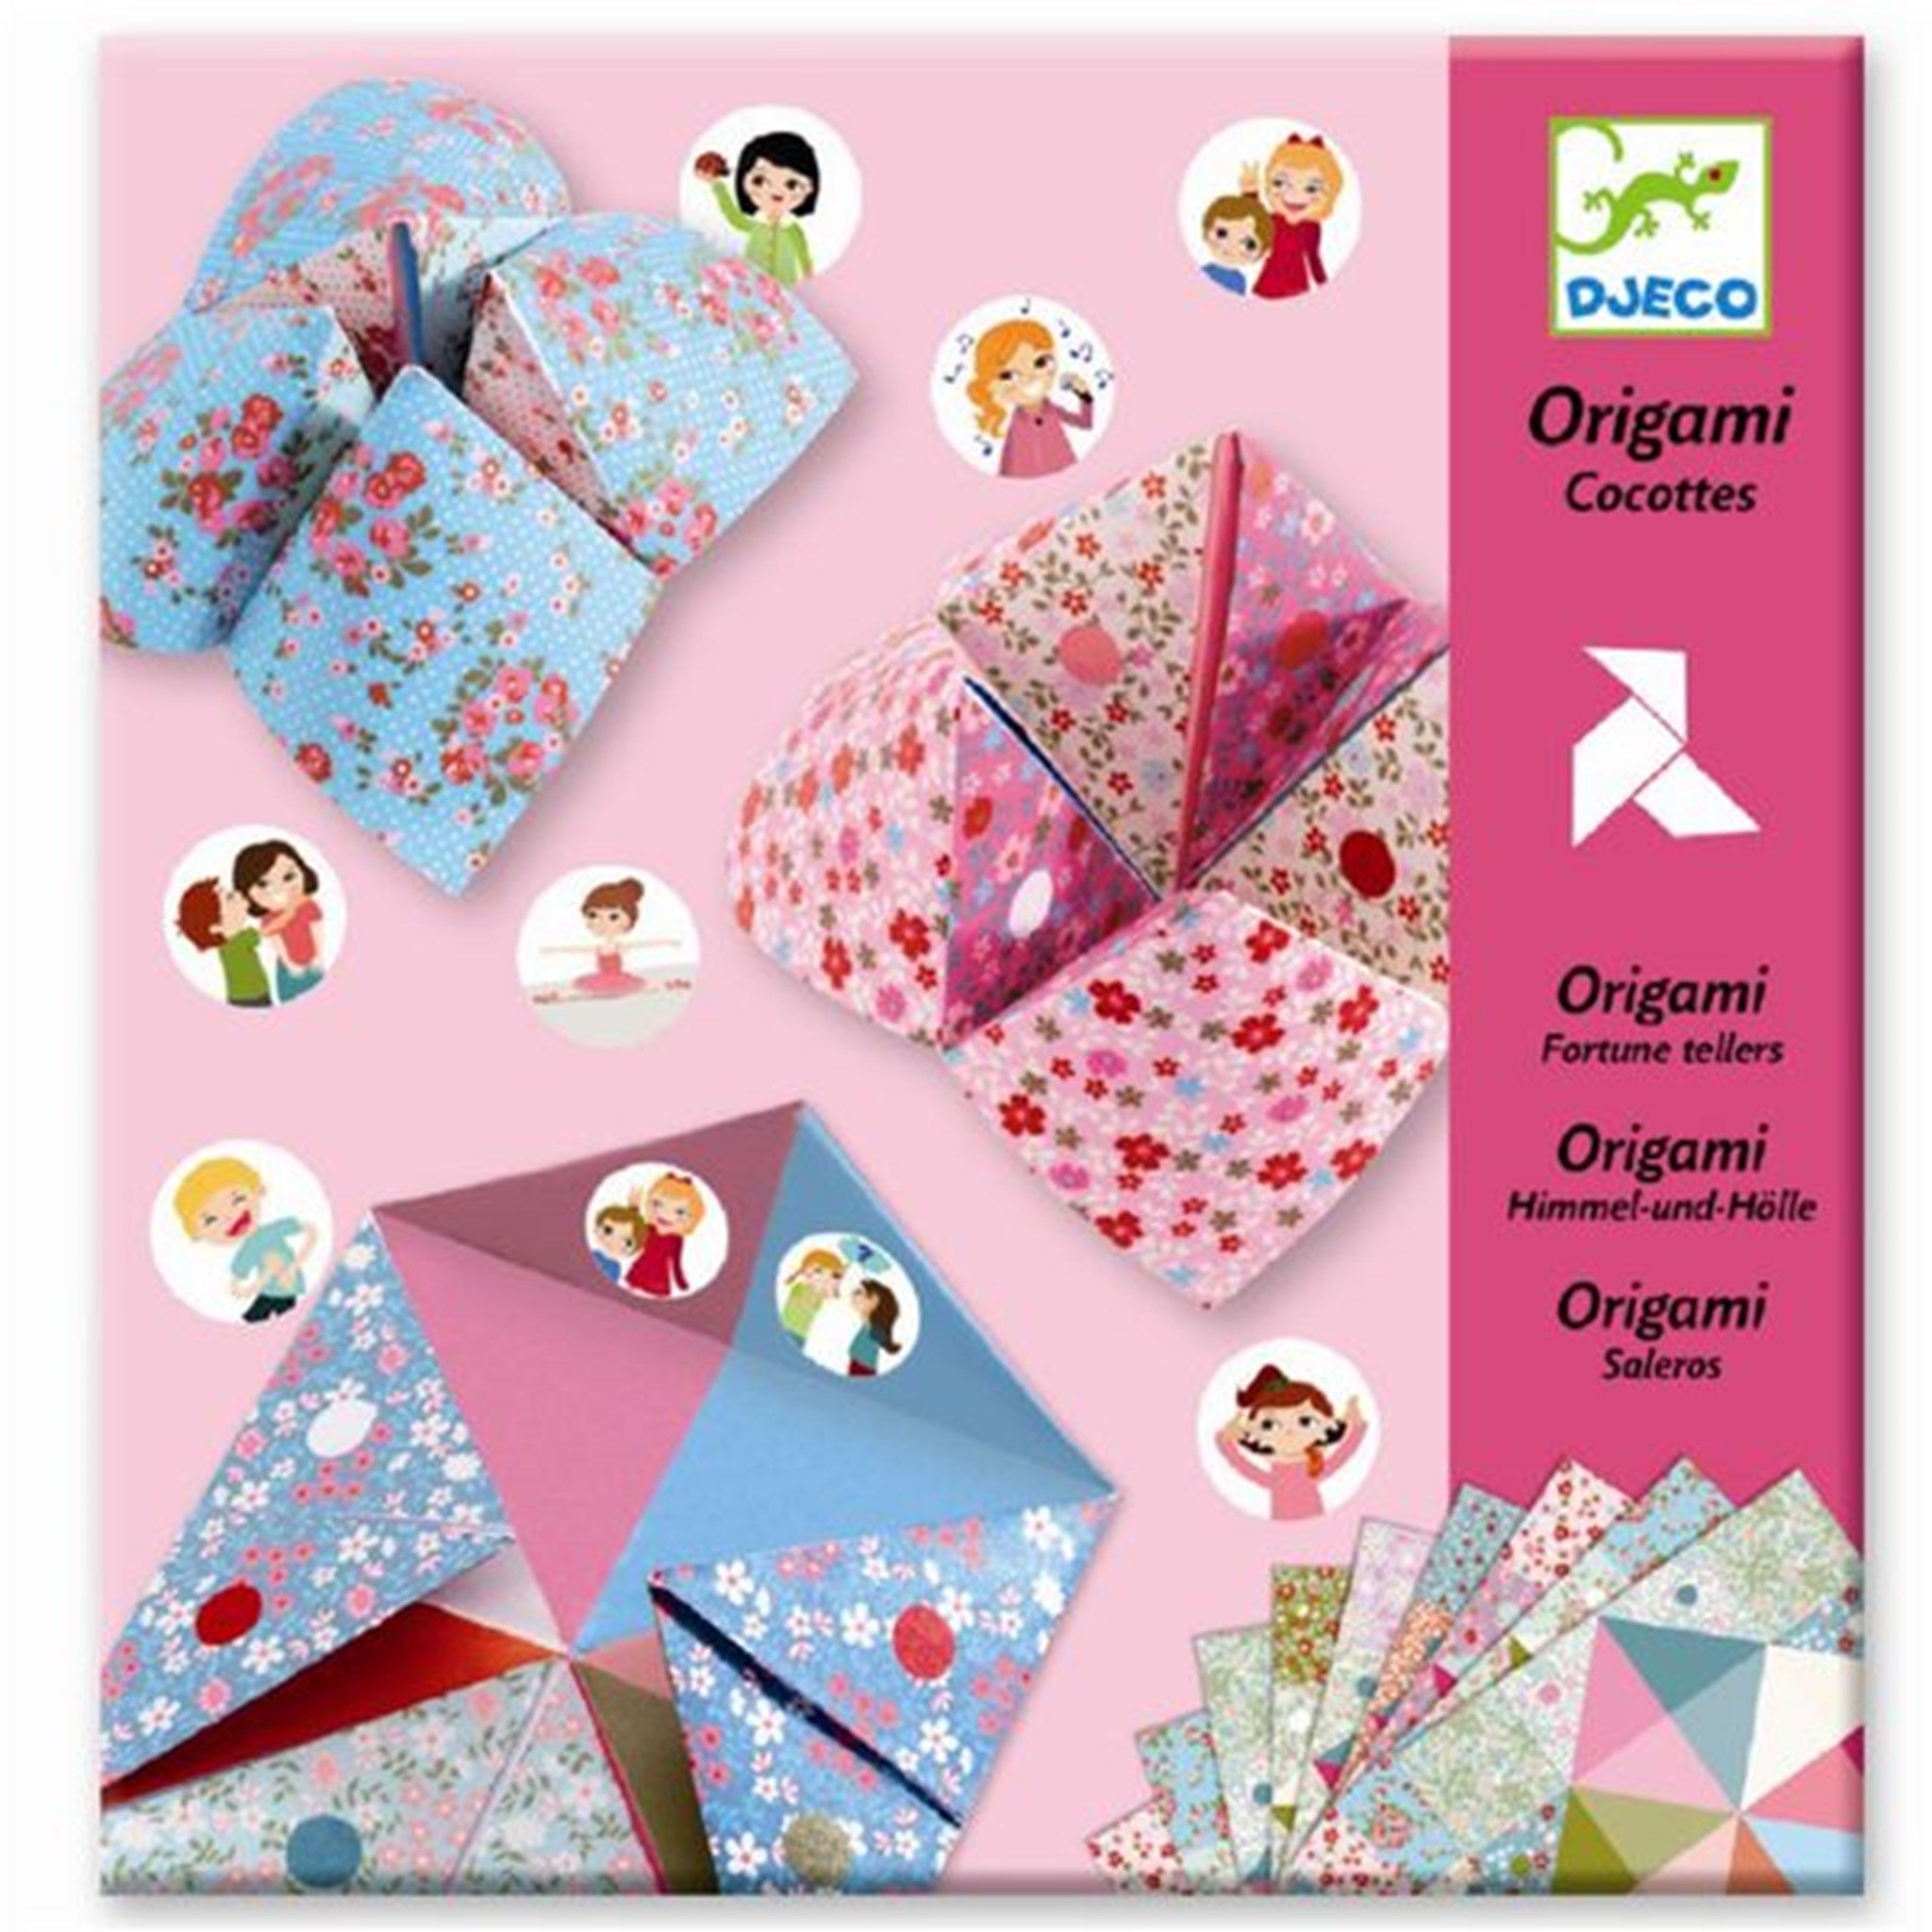 Djeco Origami Fortune Tellers Flowers